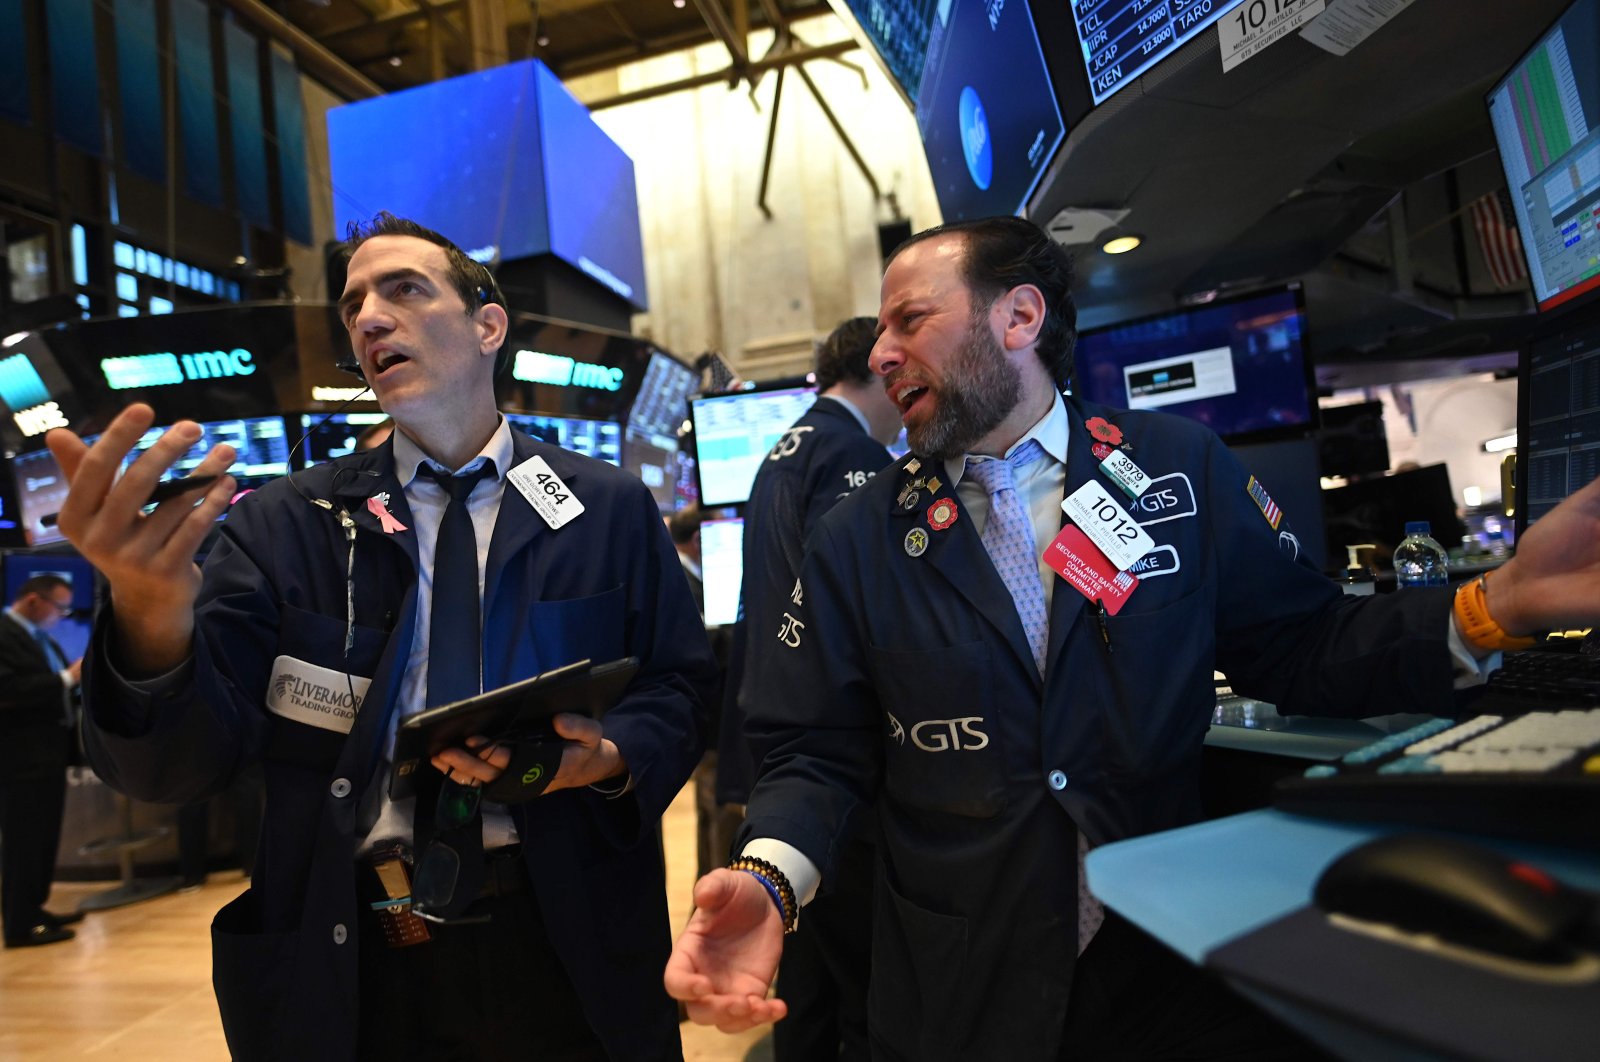 Traders work during the opening bell at the New York Stock Exchange, New York City, U.S., Monday, March 16, 2020. (AFP Photo)